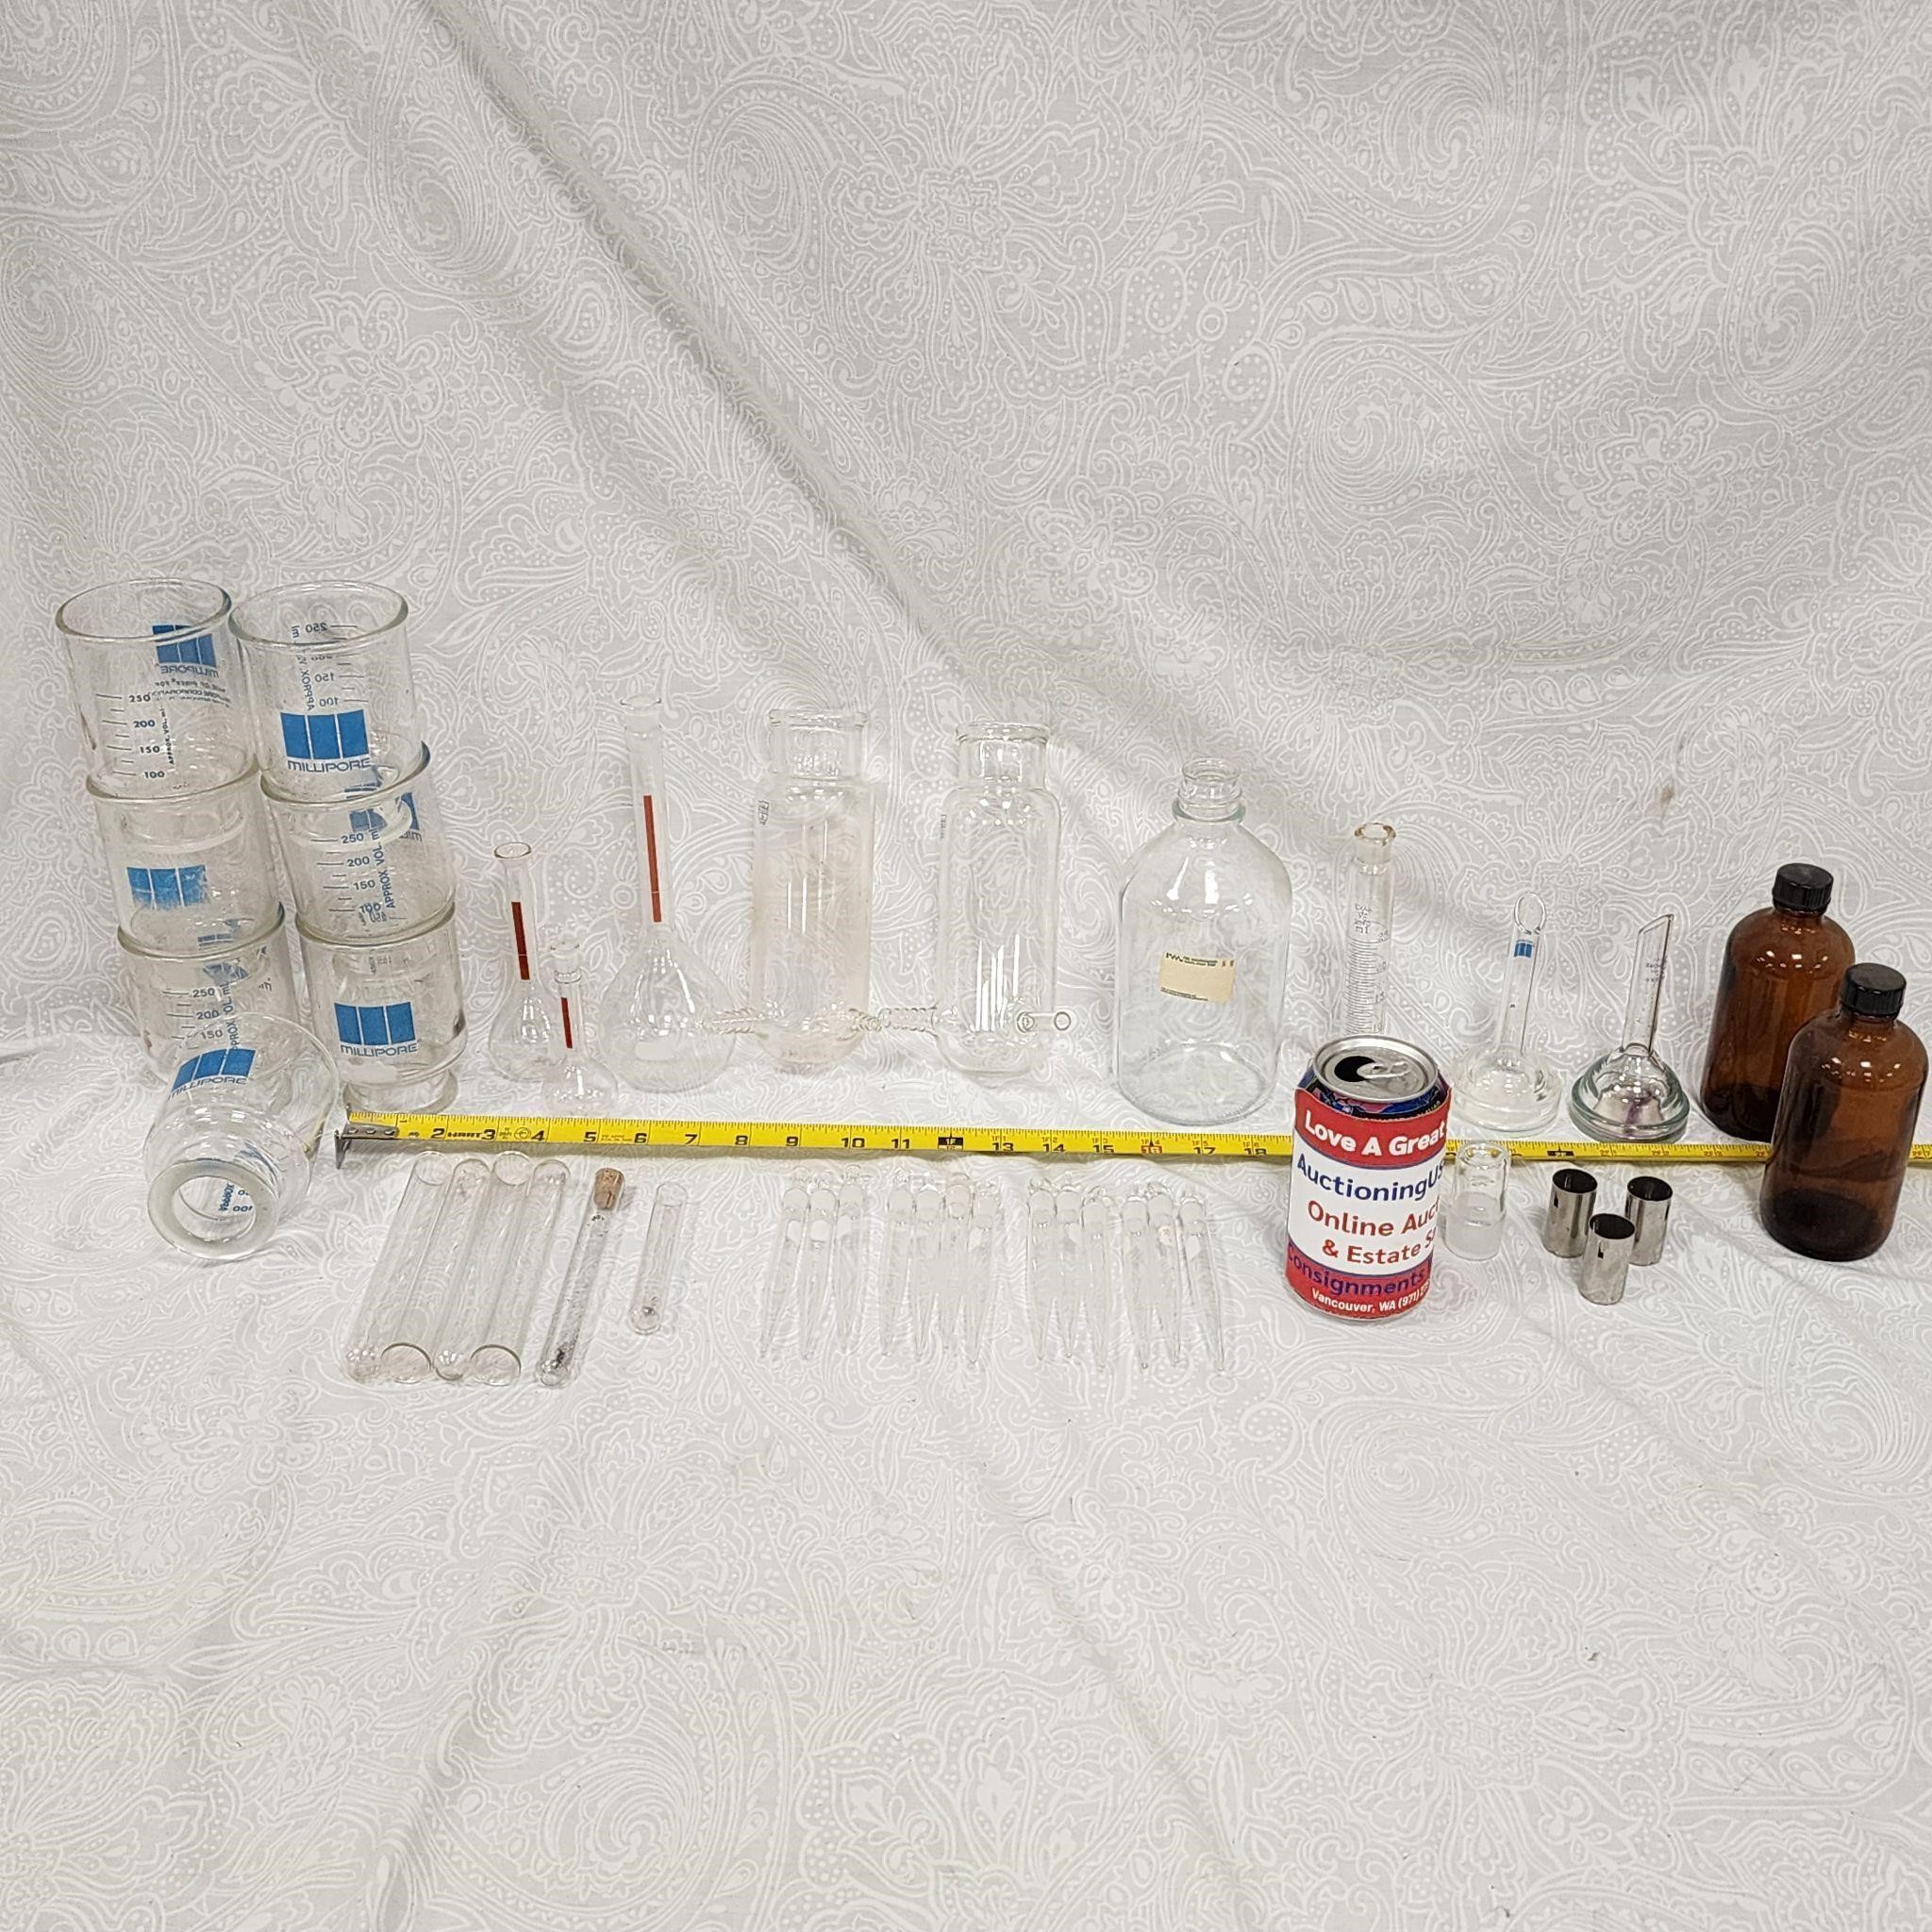 Science Apothecary Lab Experiment Glass Equipment